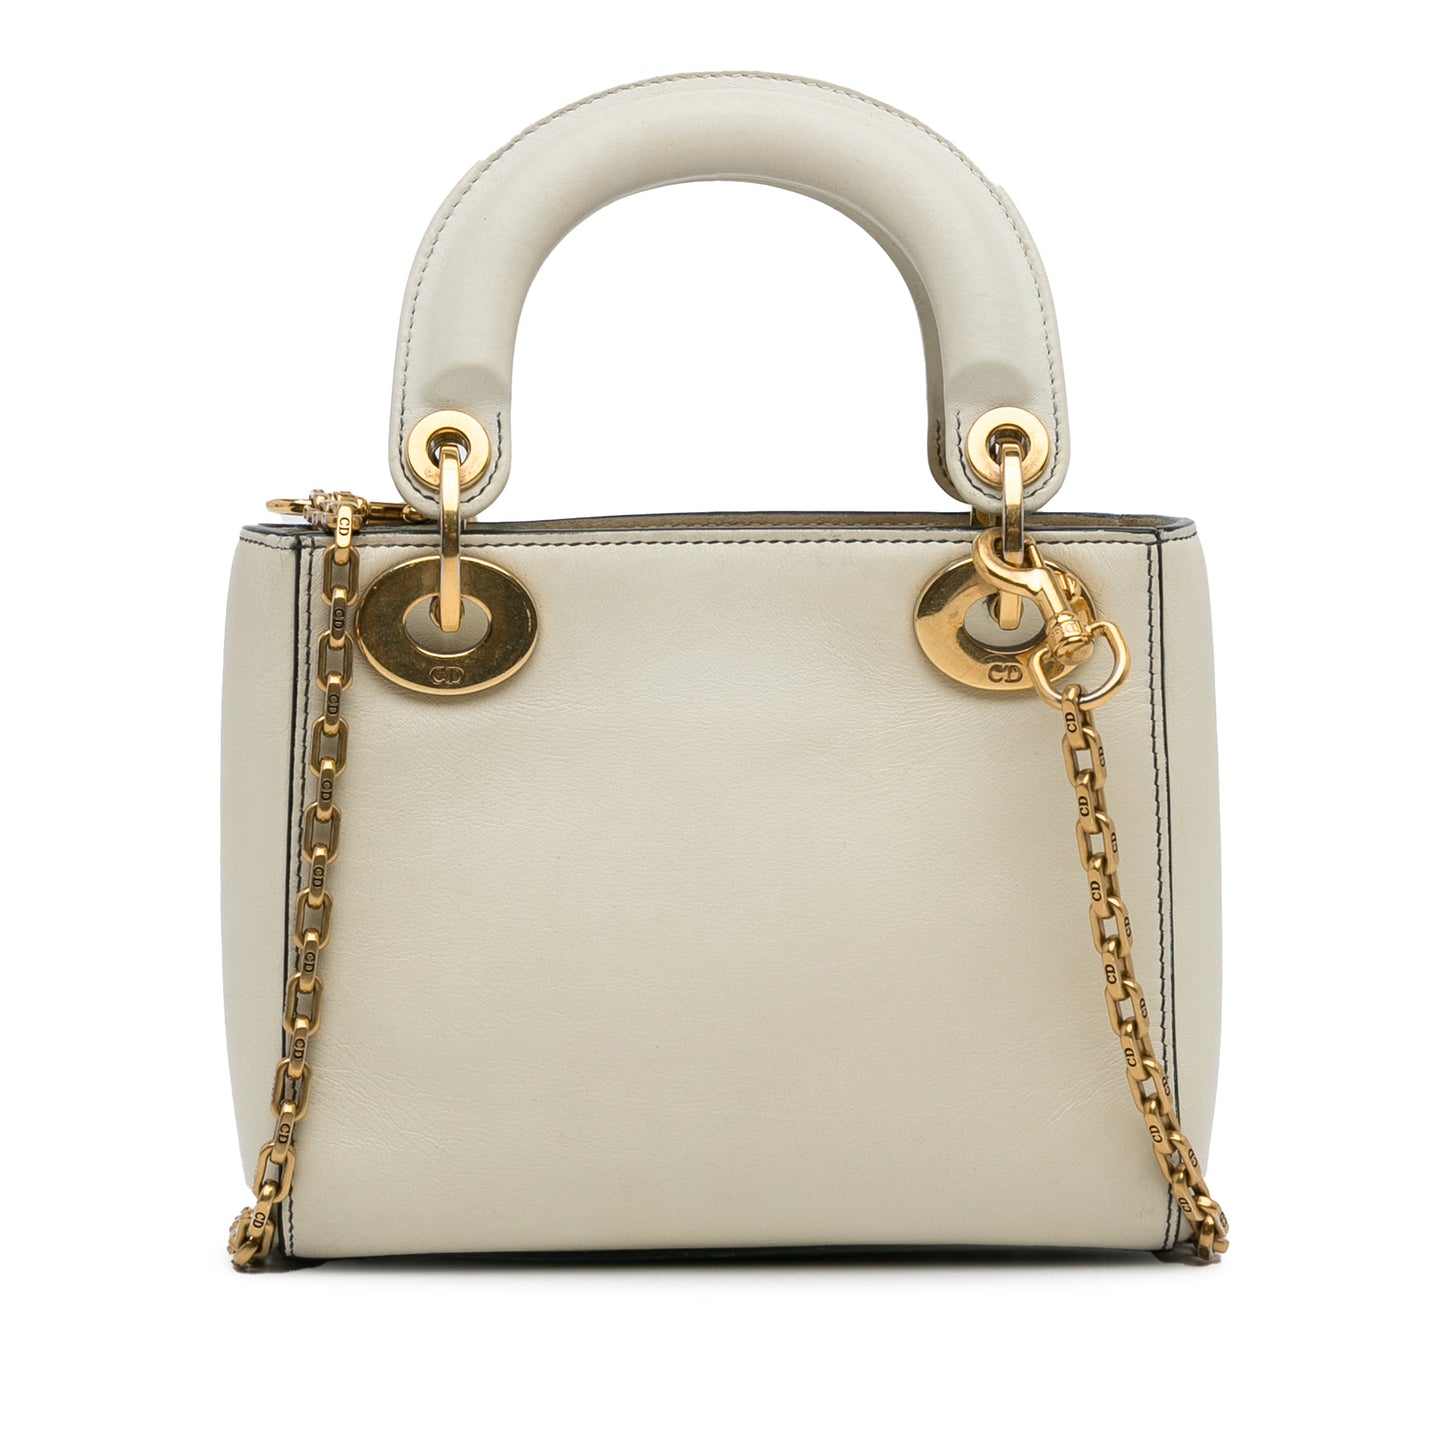 Limited Edition Mini Lady DiorAmour Lady Dior White - Gaby Paris